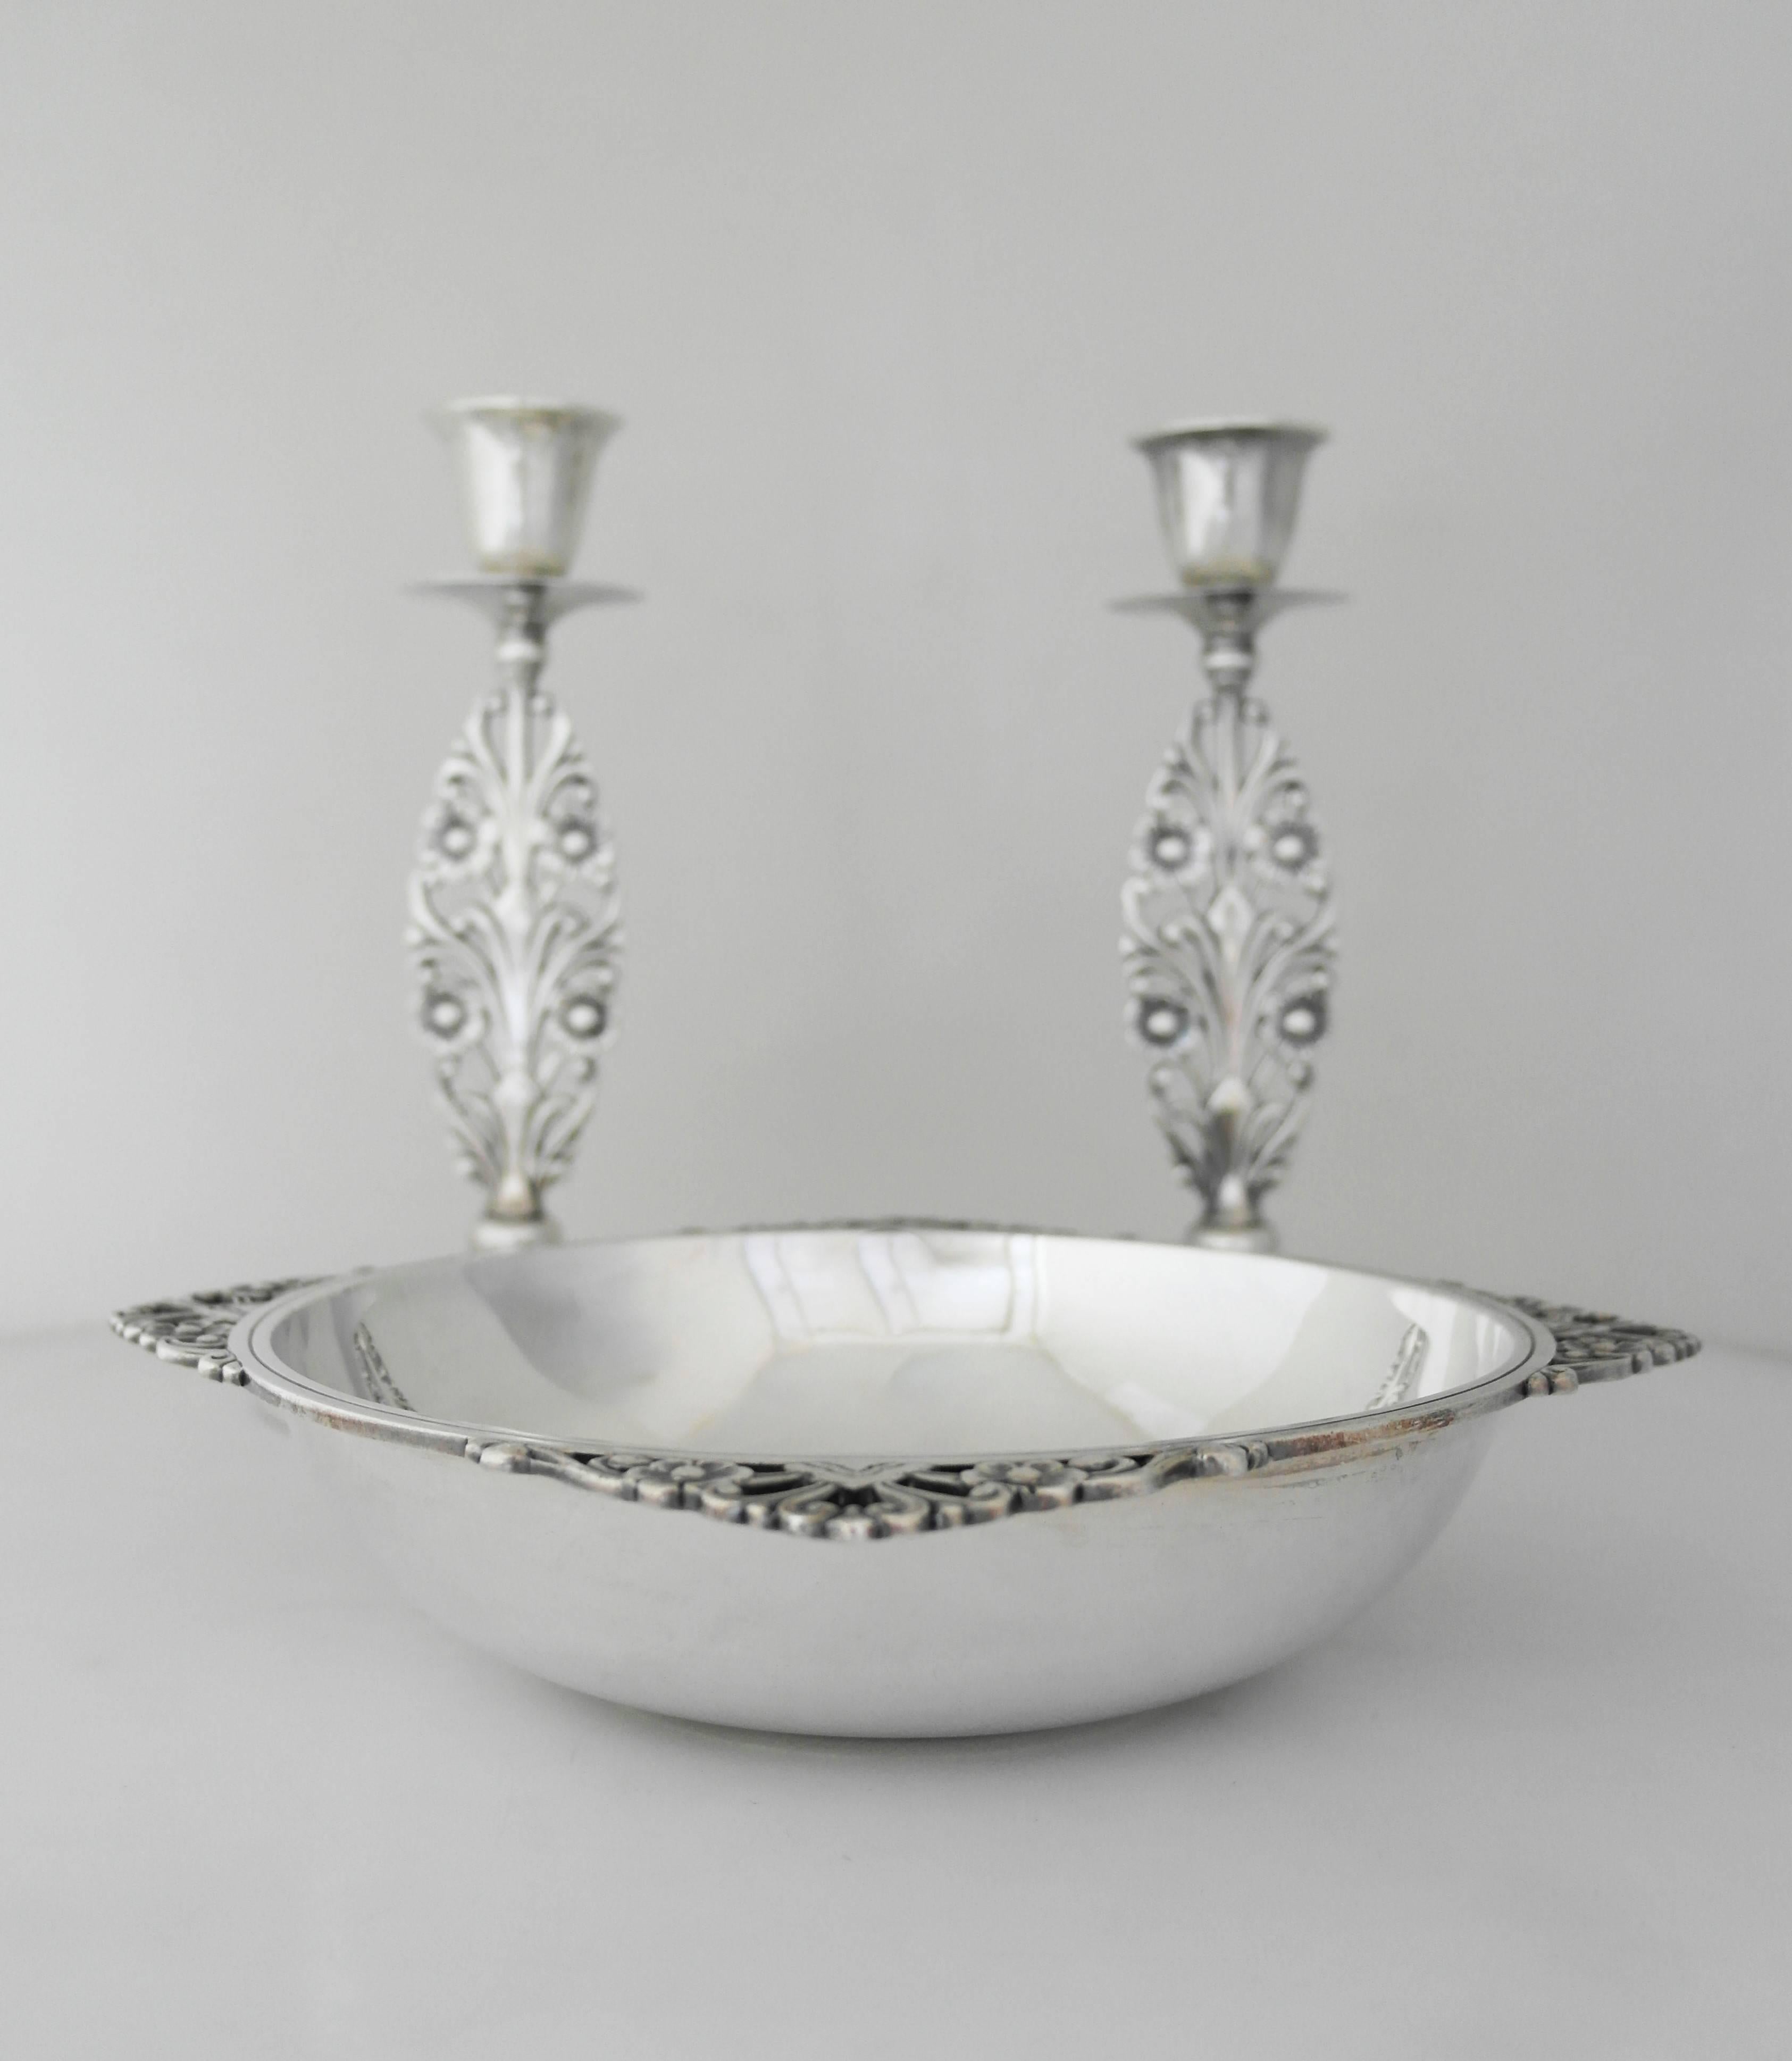 Being offered are a pair of Art Deco candlesticks and matching bowl by Tiffany & Co. of New York, circa 1925. Set decorated with pierced floral and scroll motifs on the stems of the candlesticks, as well as the bowl. Dimensions: bowl- 10 inches